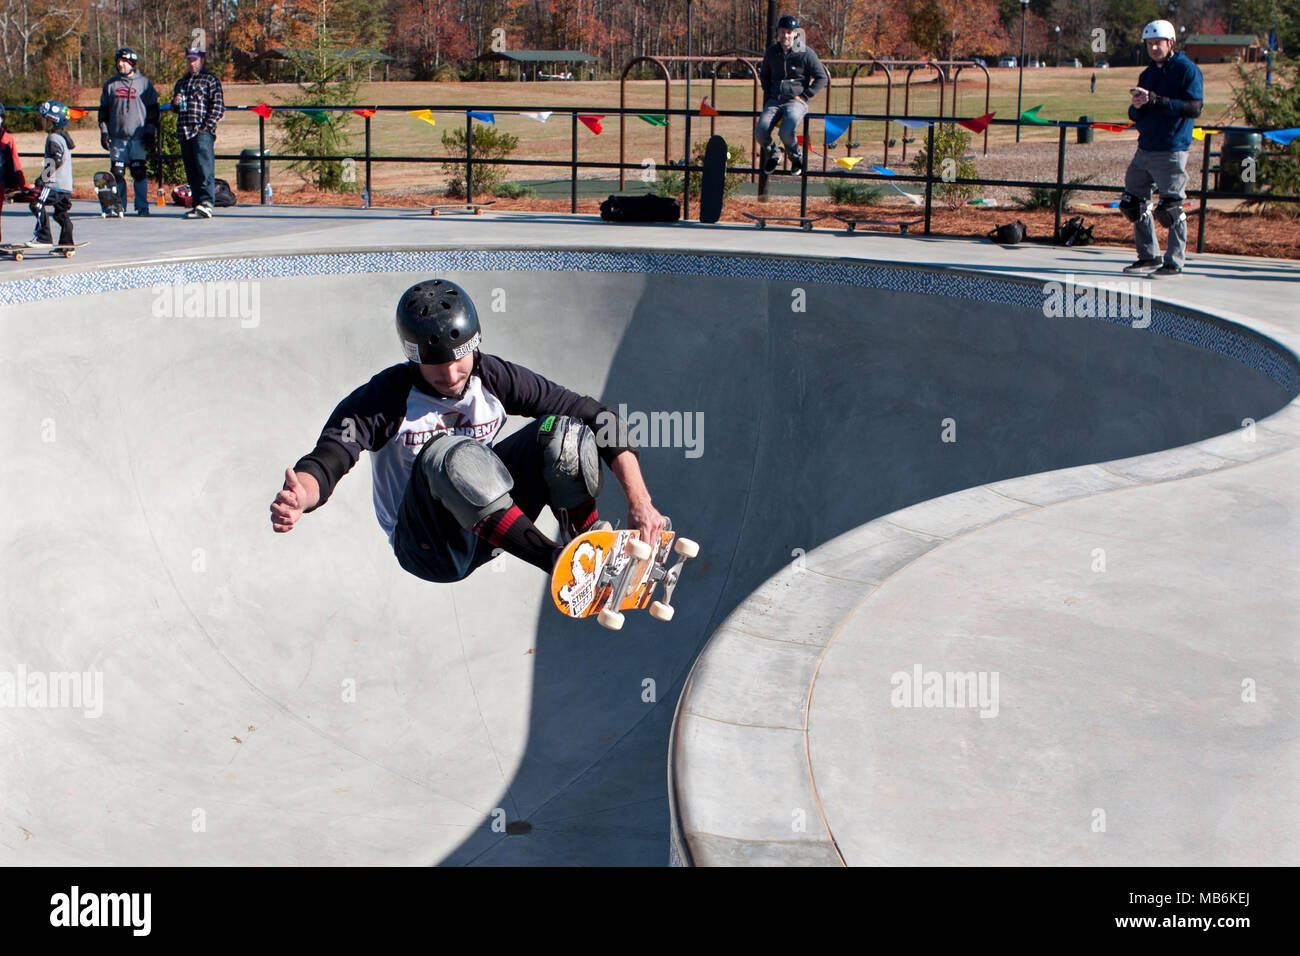 A veteran skateboarder goes airborne while grabbing his board during 'Old Man Sundays,' at the skateboard park in Kennesaw, GA on November 24, 2013. Stock Photo